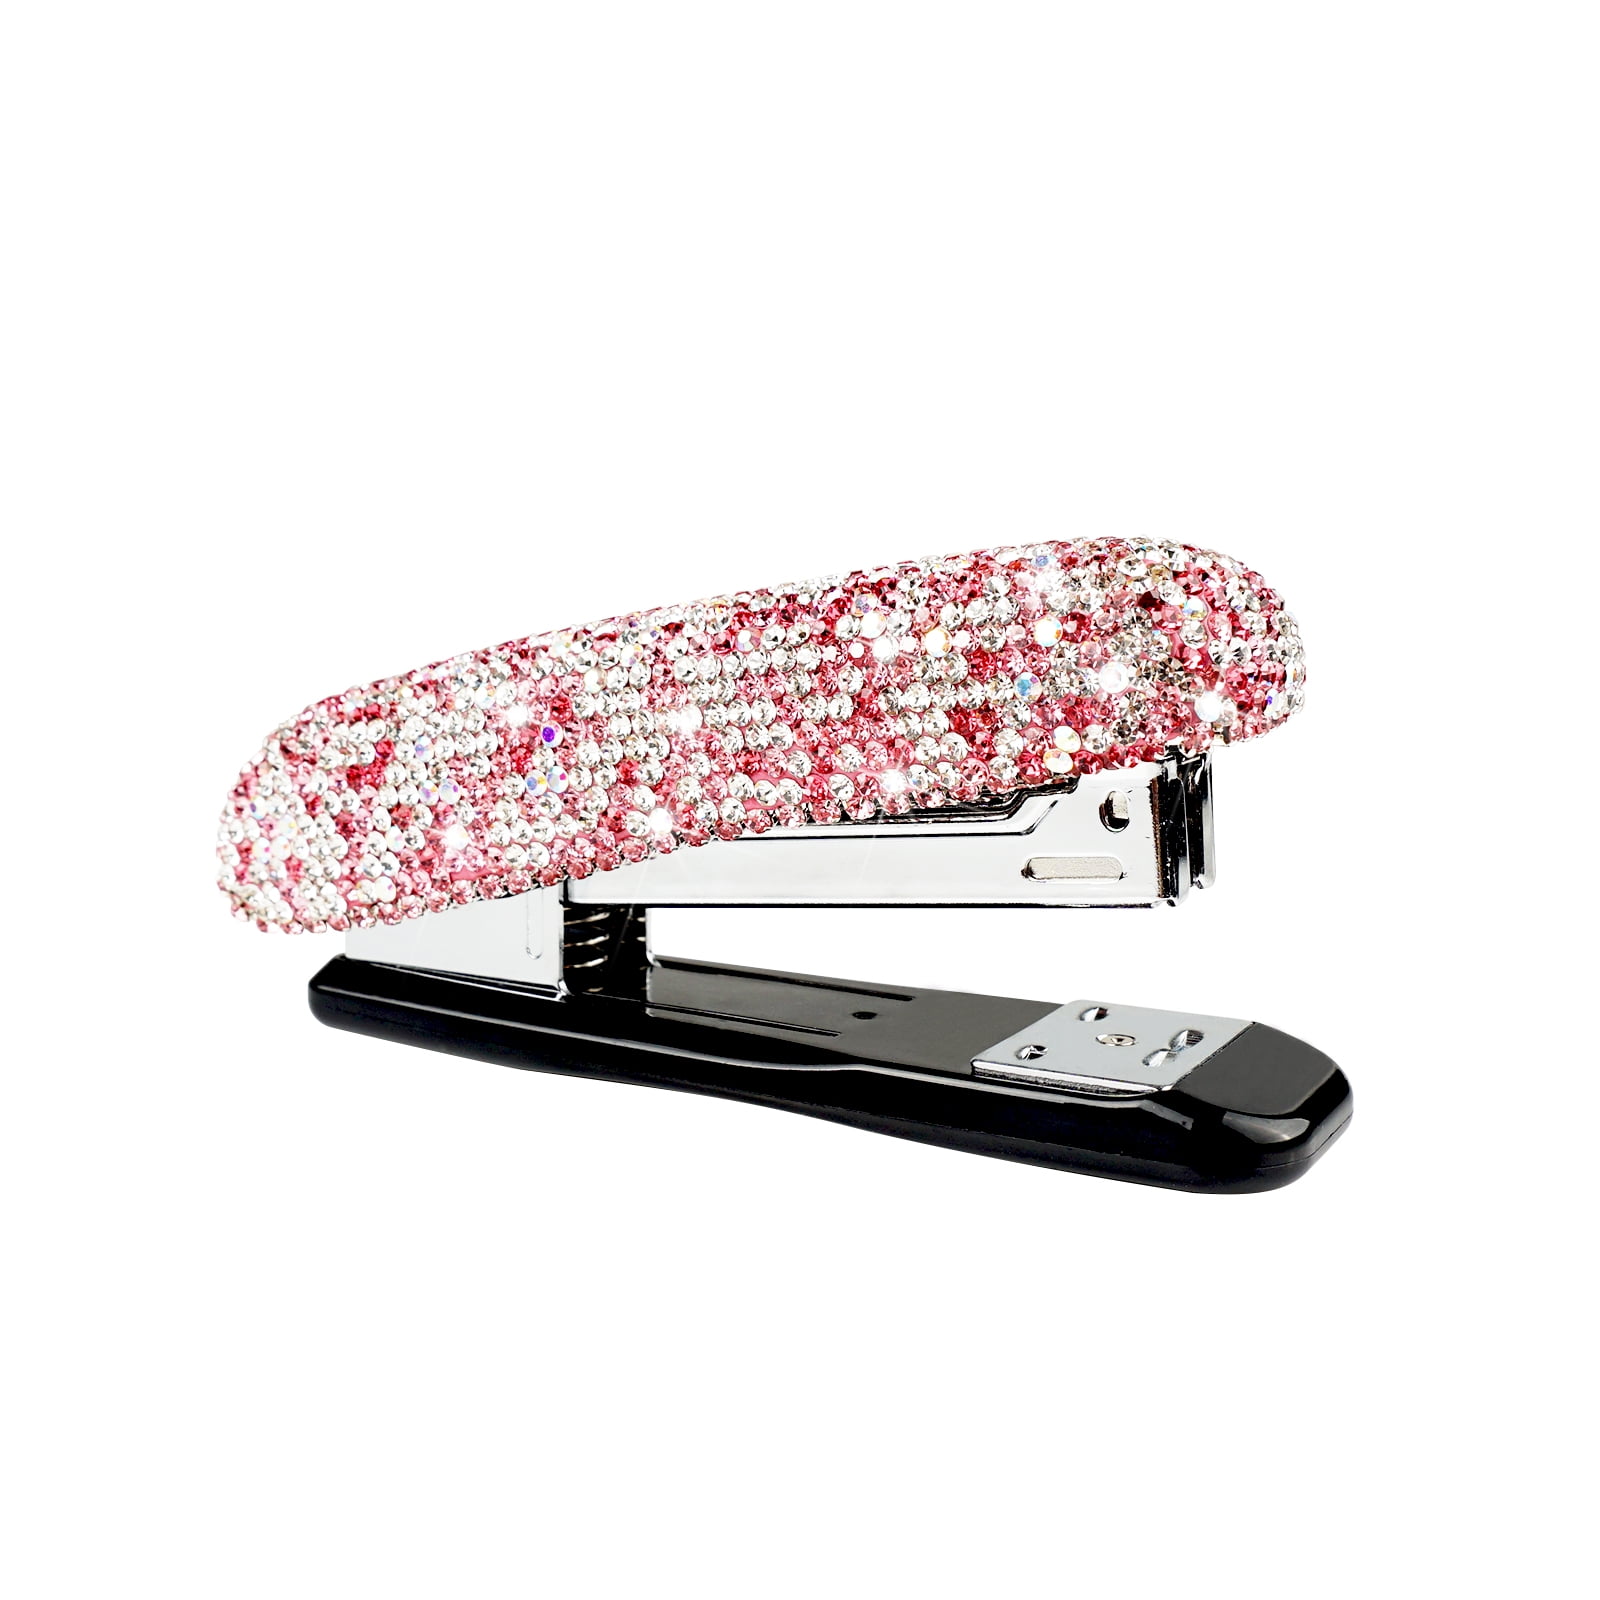 Pink sparkly school supplies! I have that stapler